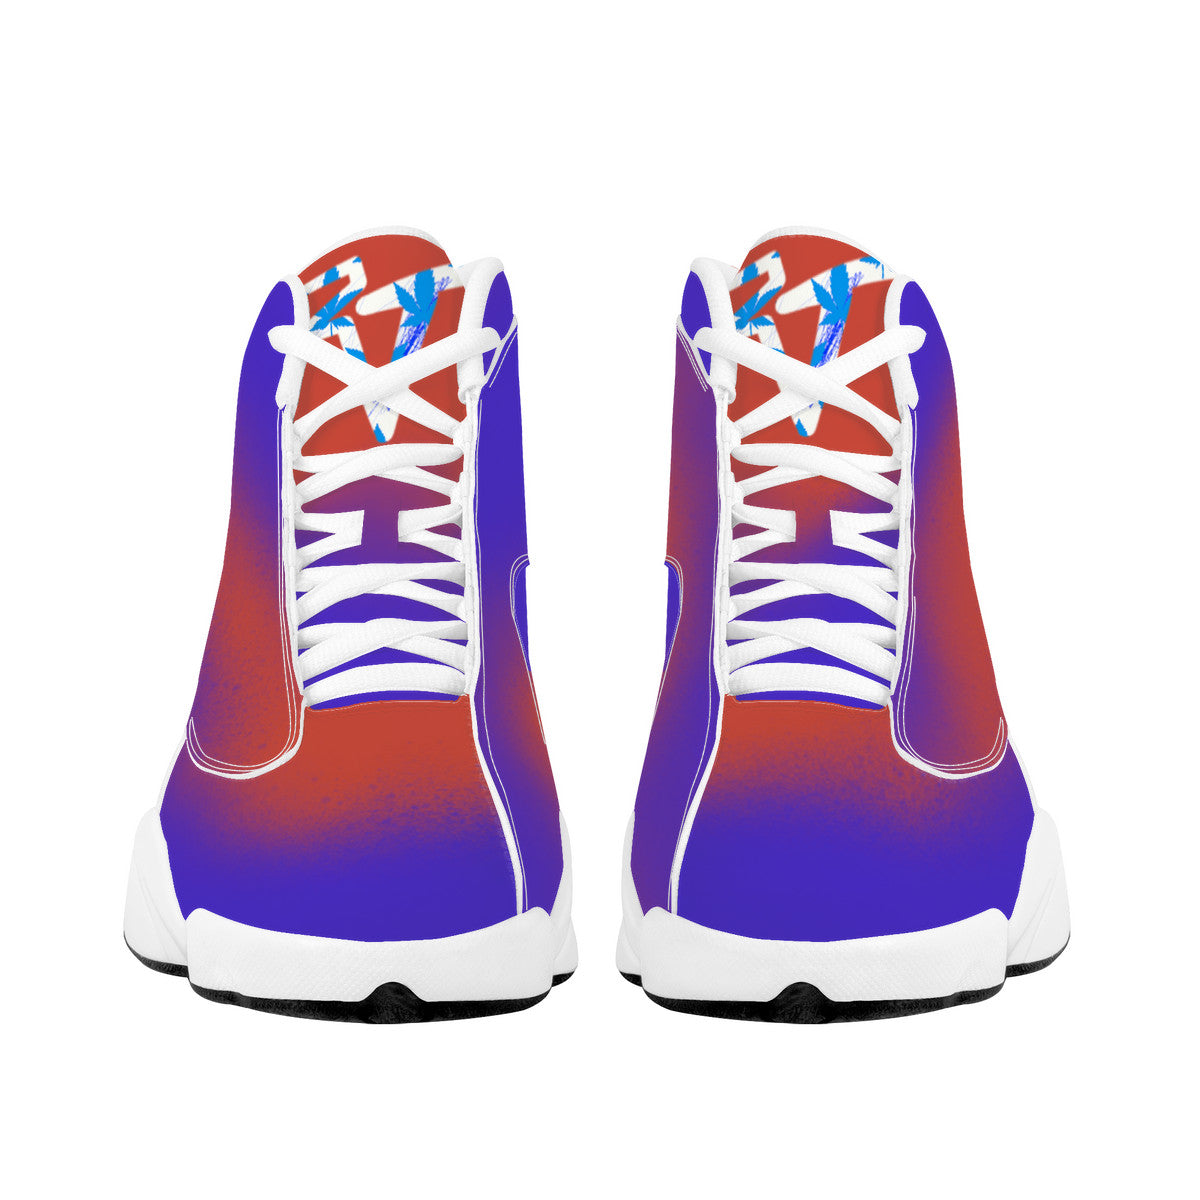 RVT Basketball Shoes - Blue Flame